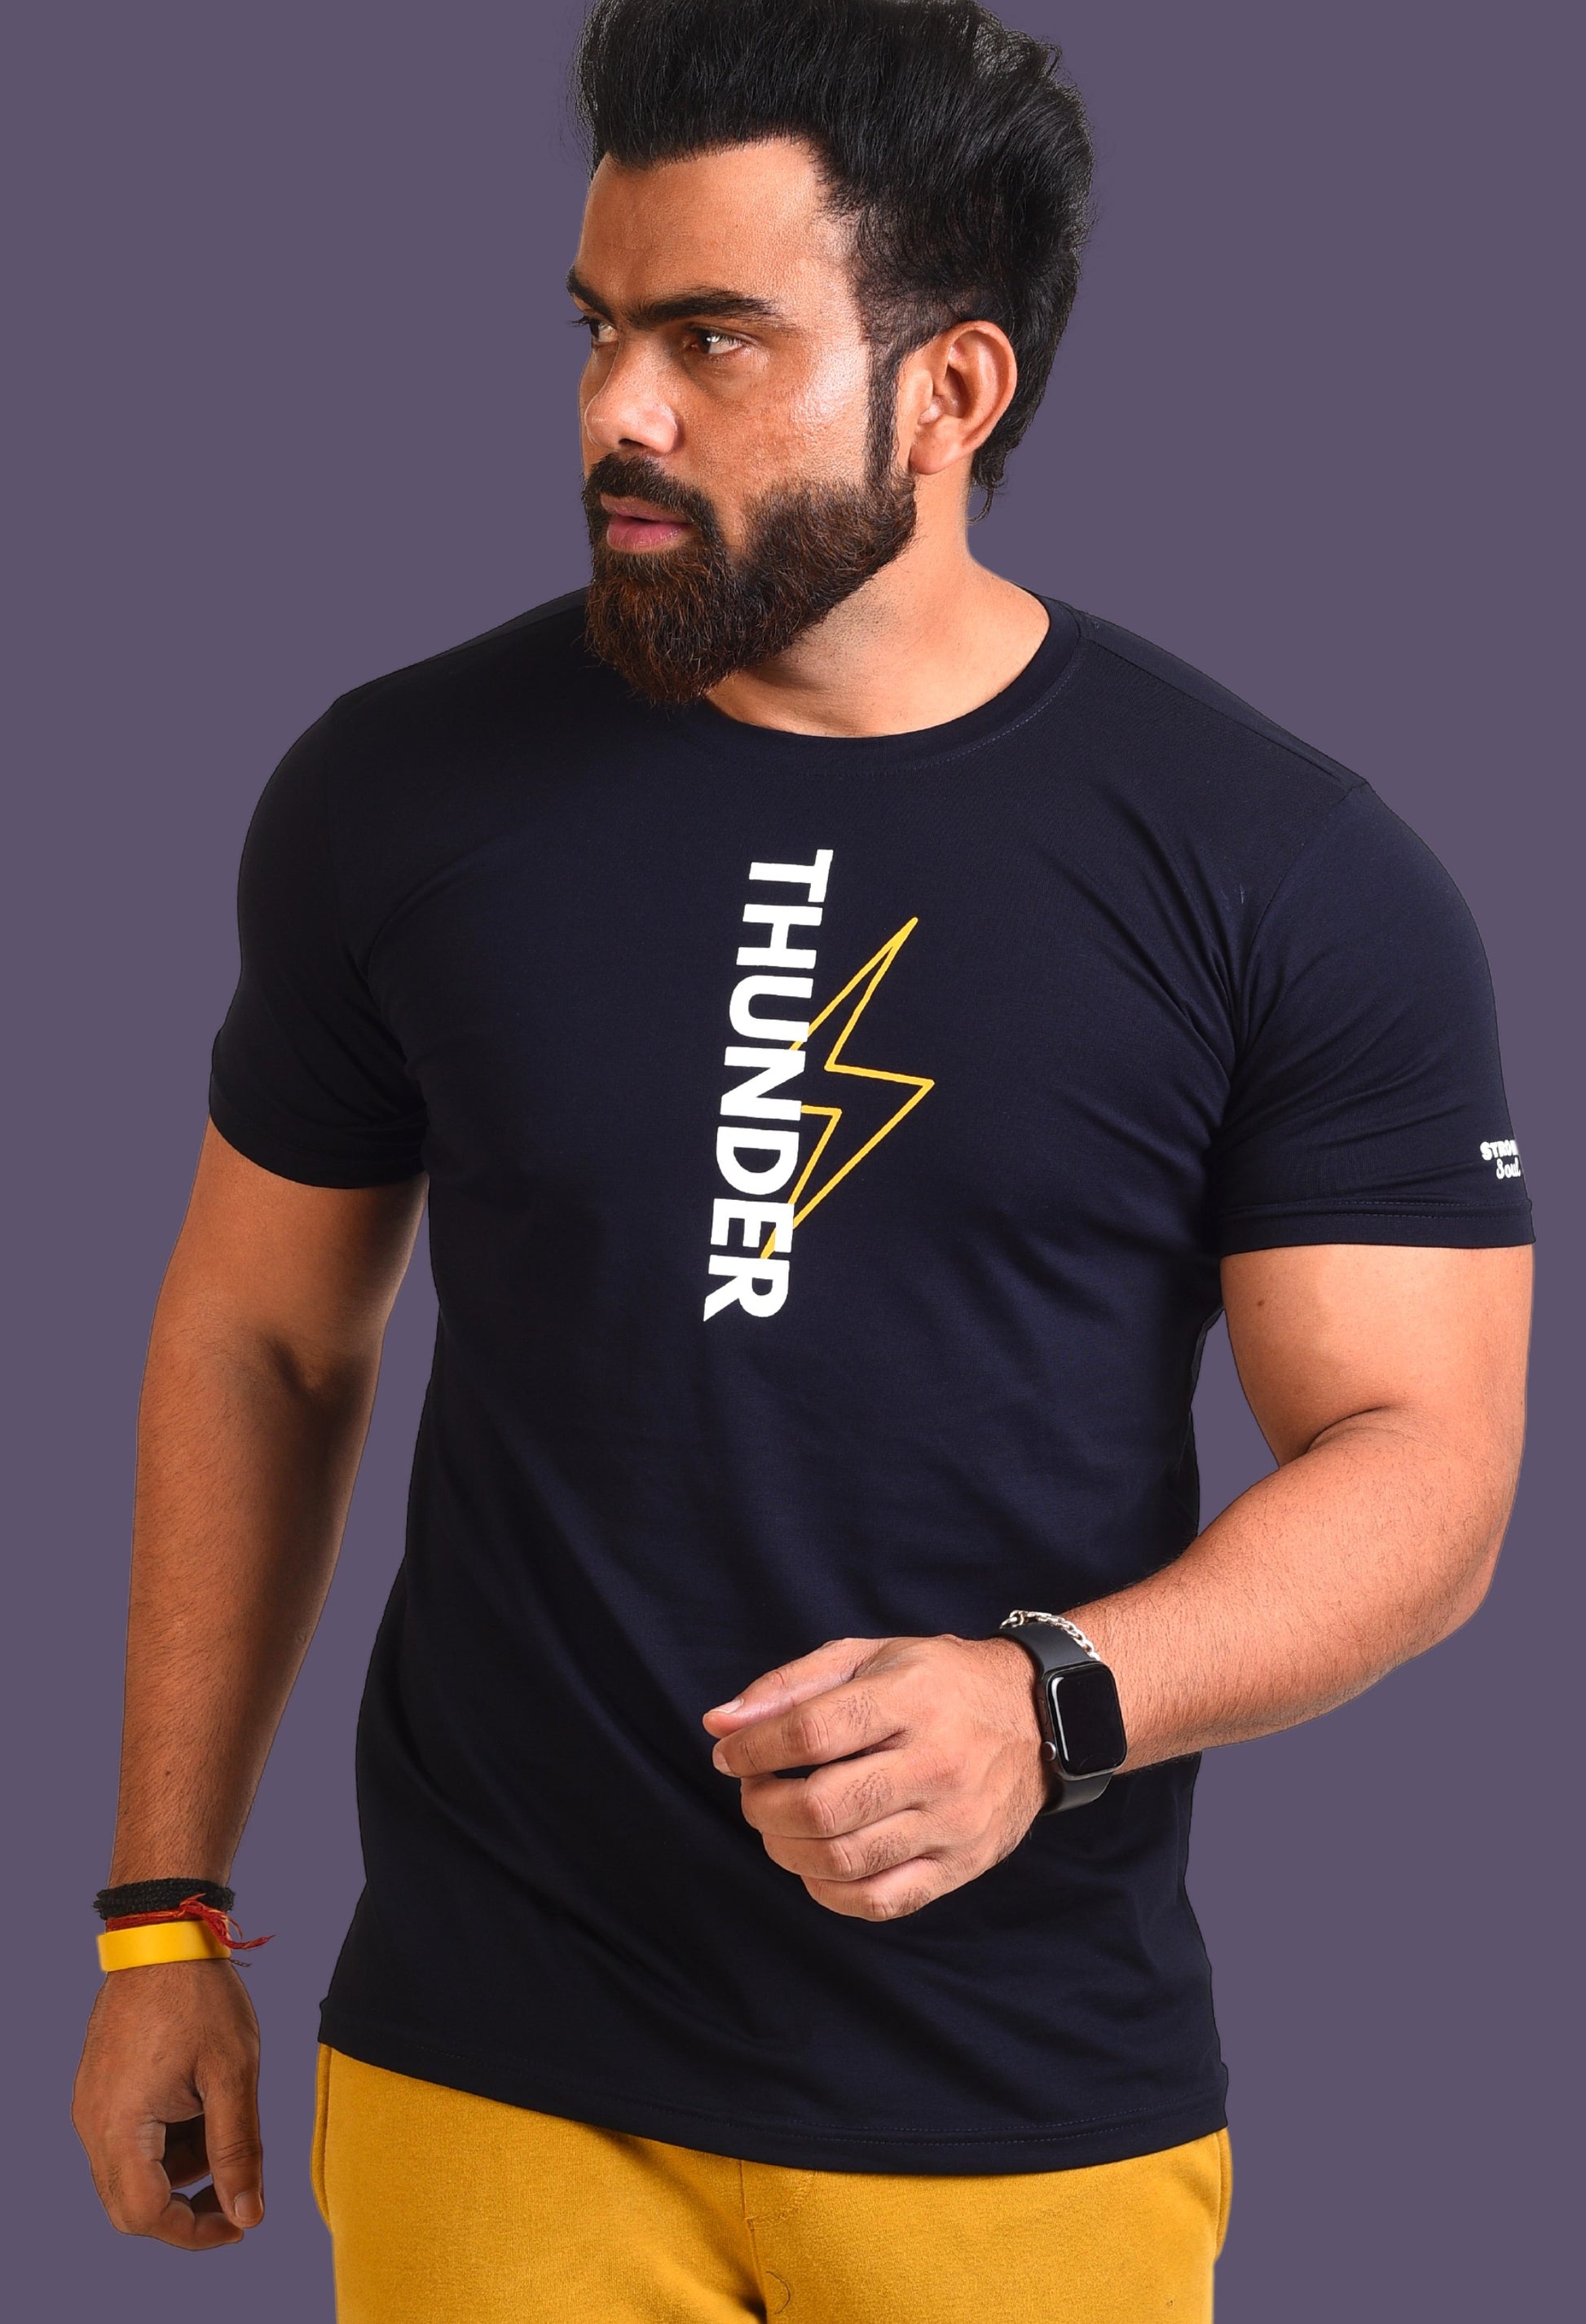 Gym T Shirt - Thunder - Men T-Shirt with premium cotton Lycra. The Sports T Shirt by Strong Soul